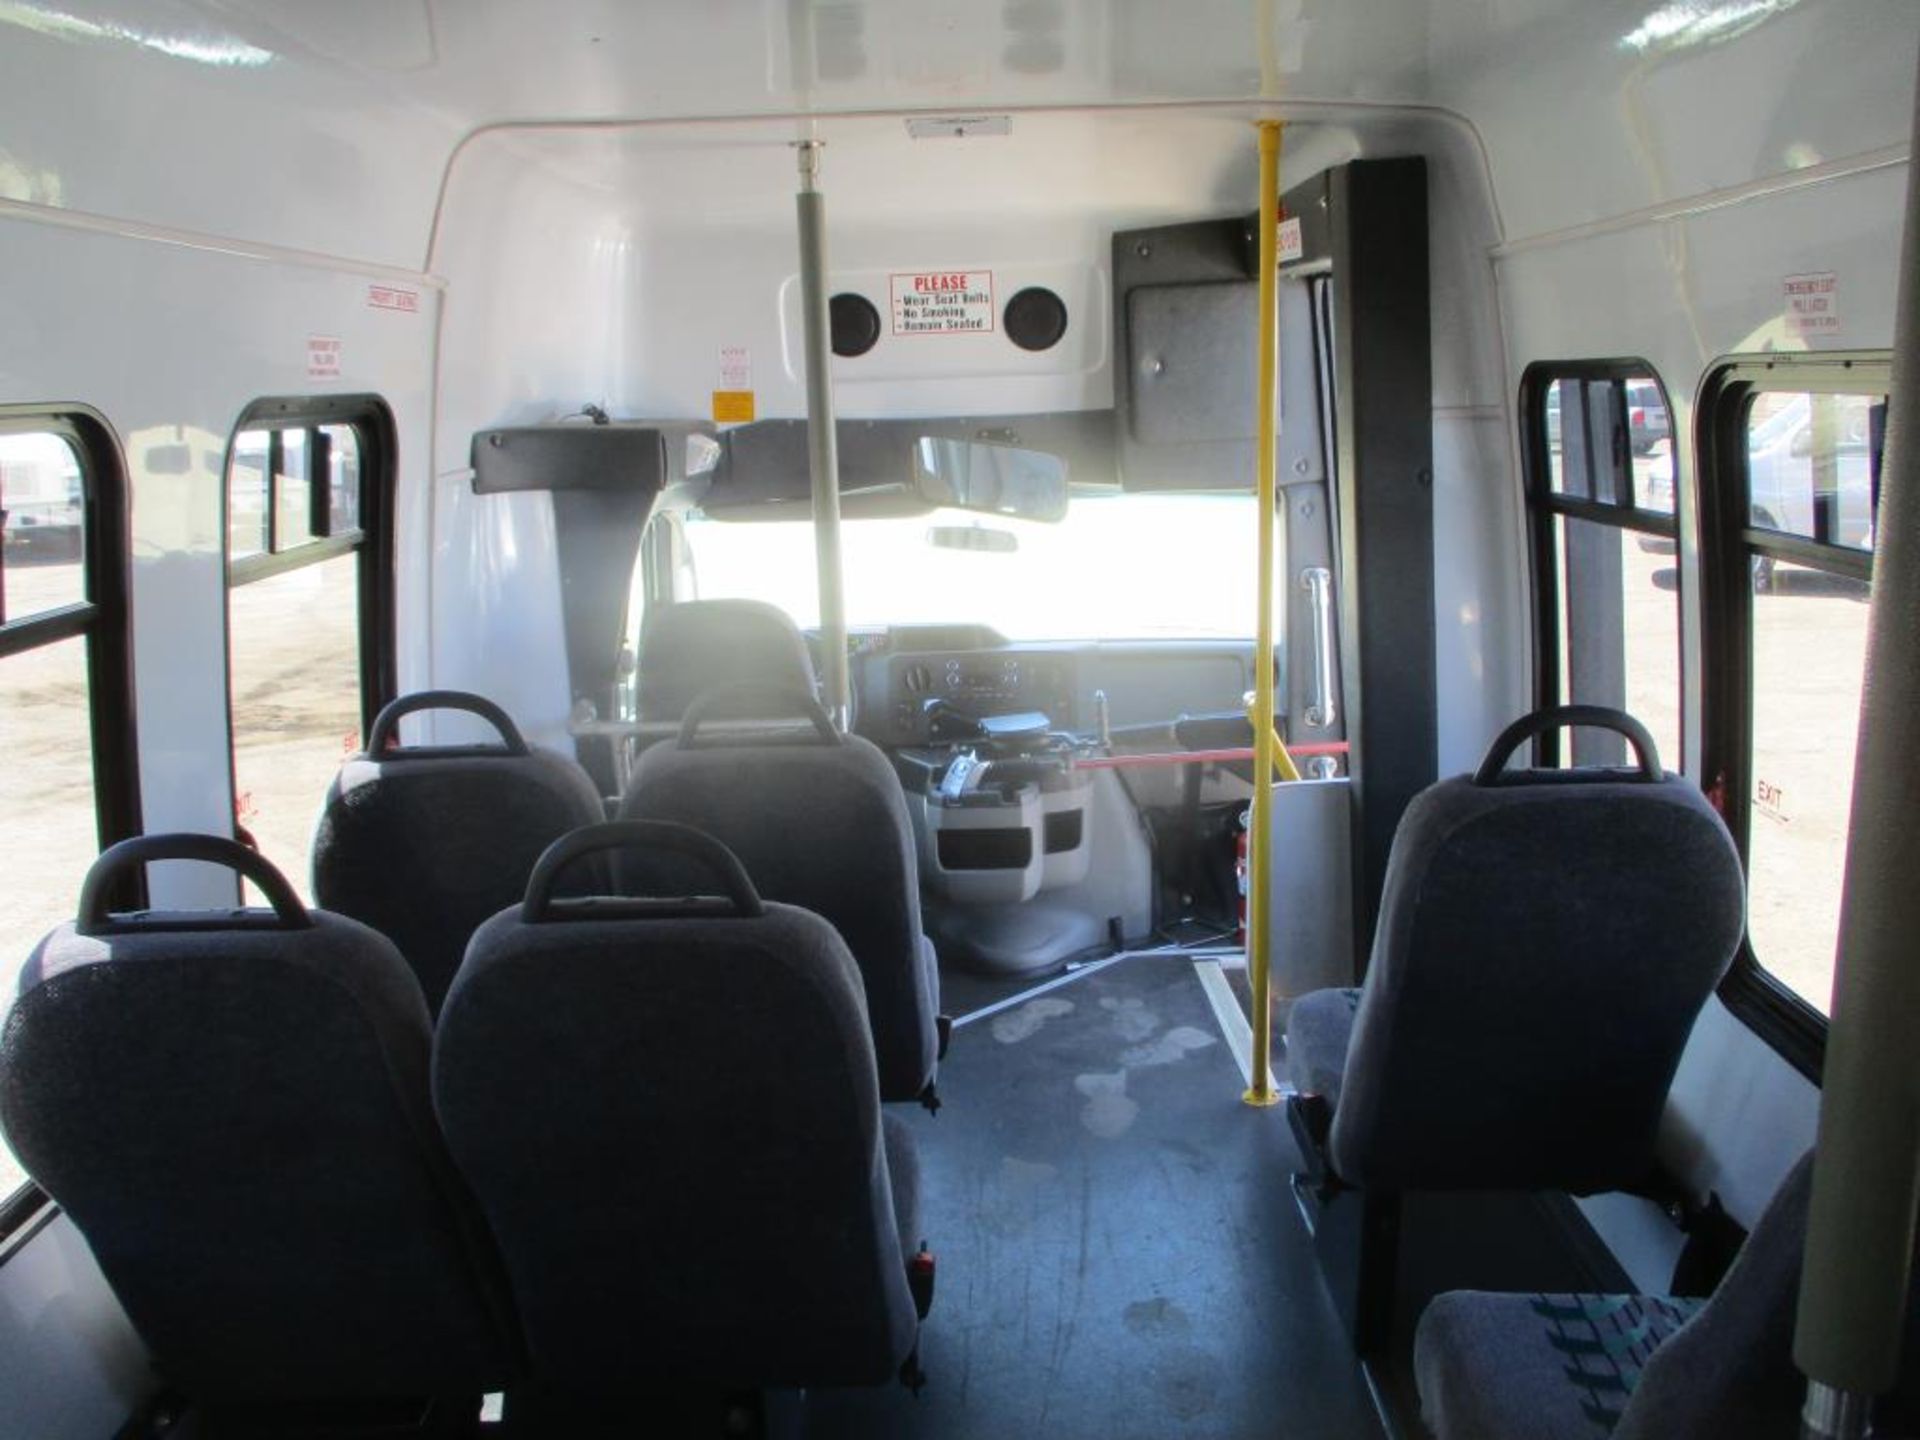 2011 Ford E-350 Shuttle Bus - Image 9 of 13